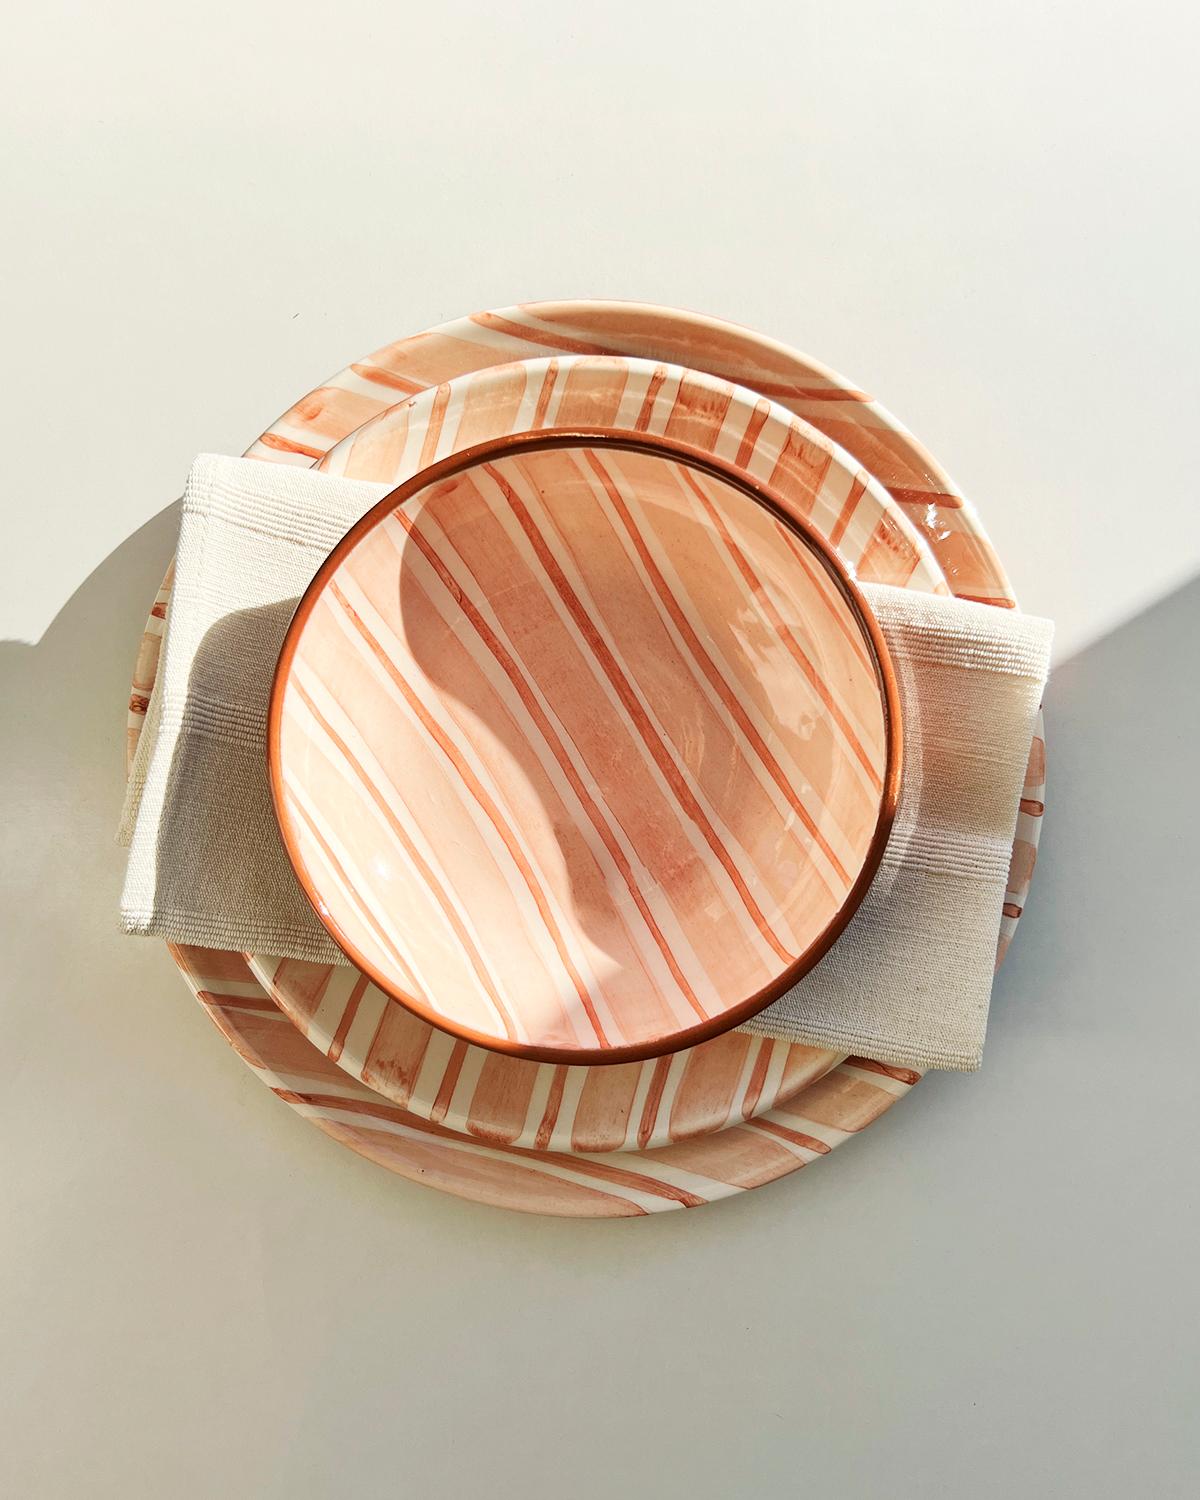 This luxurious terracotta dinnerware is handmade from ceramic with fair trade and locally sourced materials from Europe. Each piece is crafted with meticulous attention to detail for a high quality and rustic look. The striped graphic pattern gives